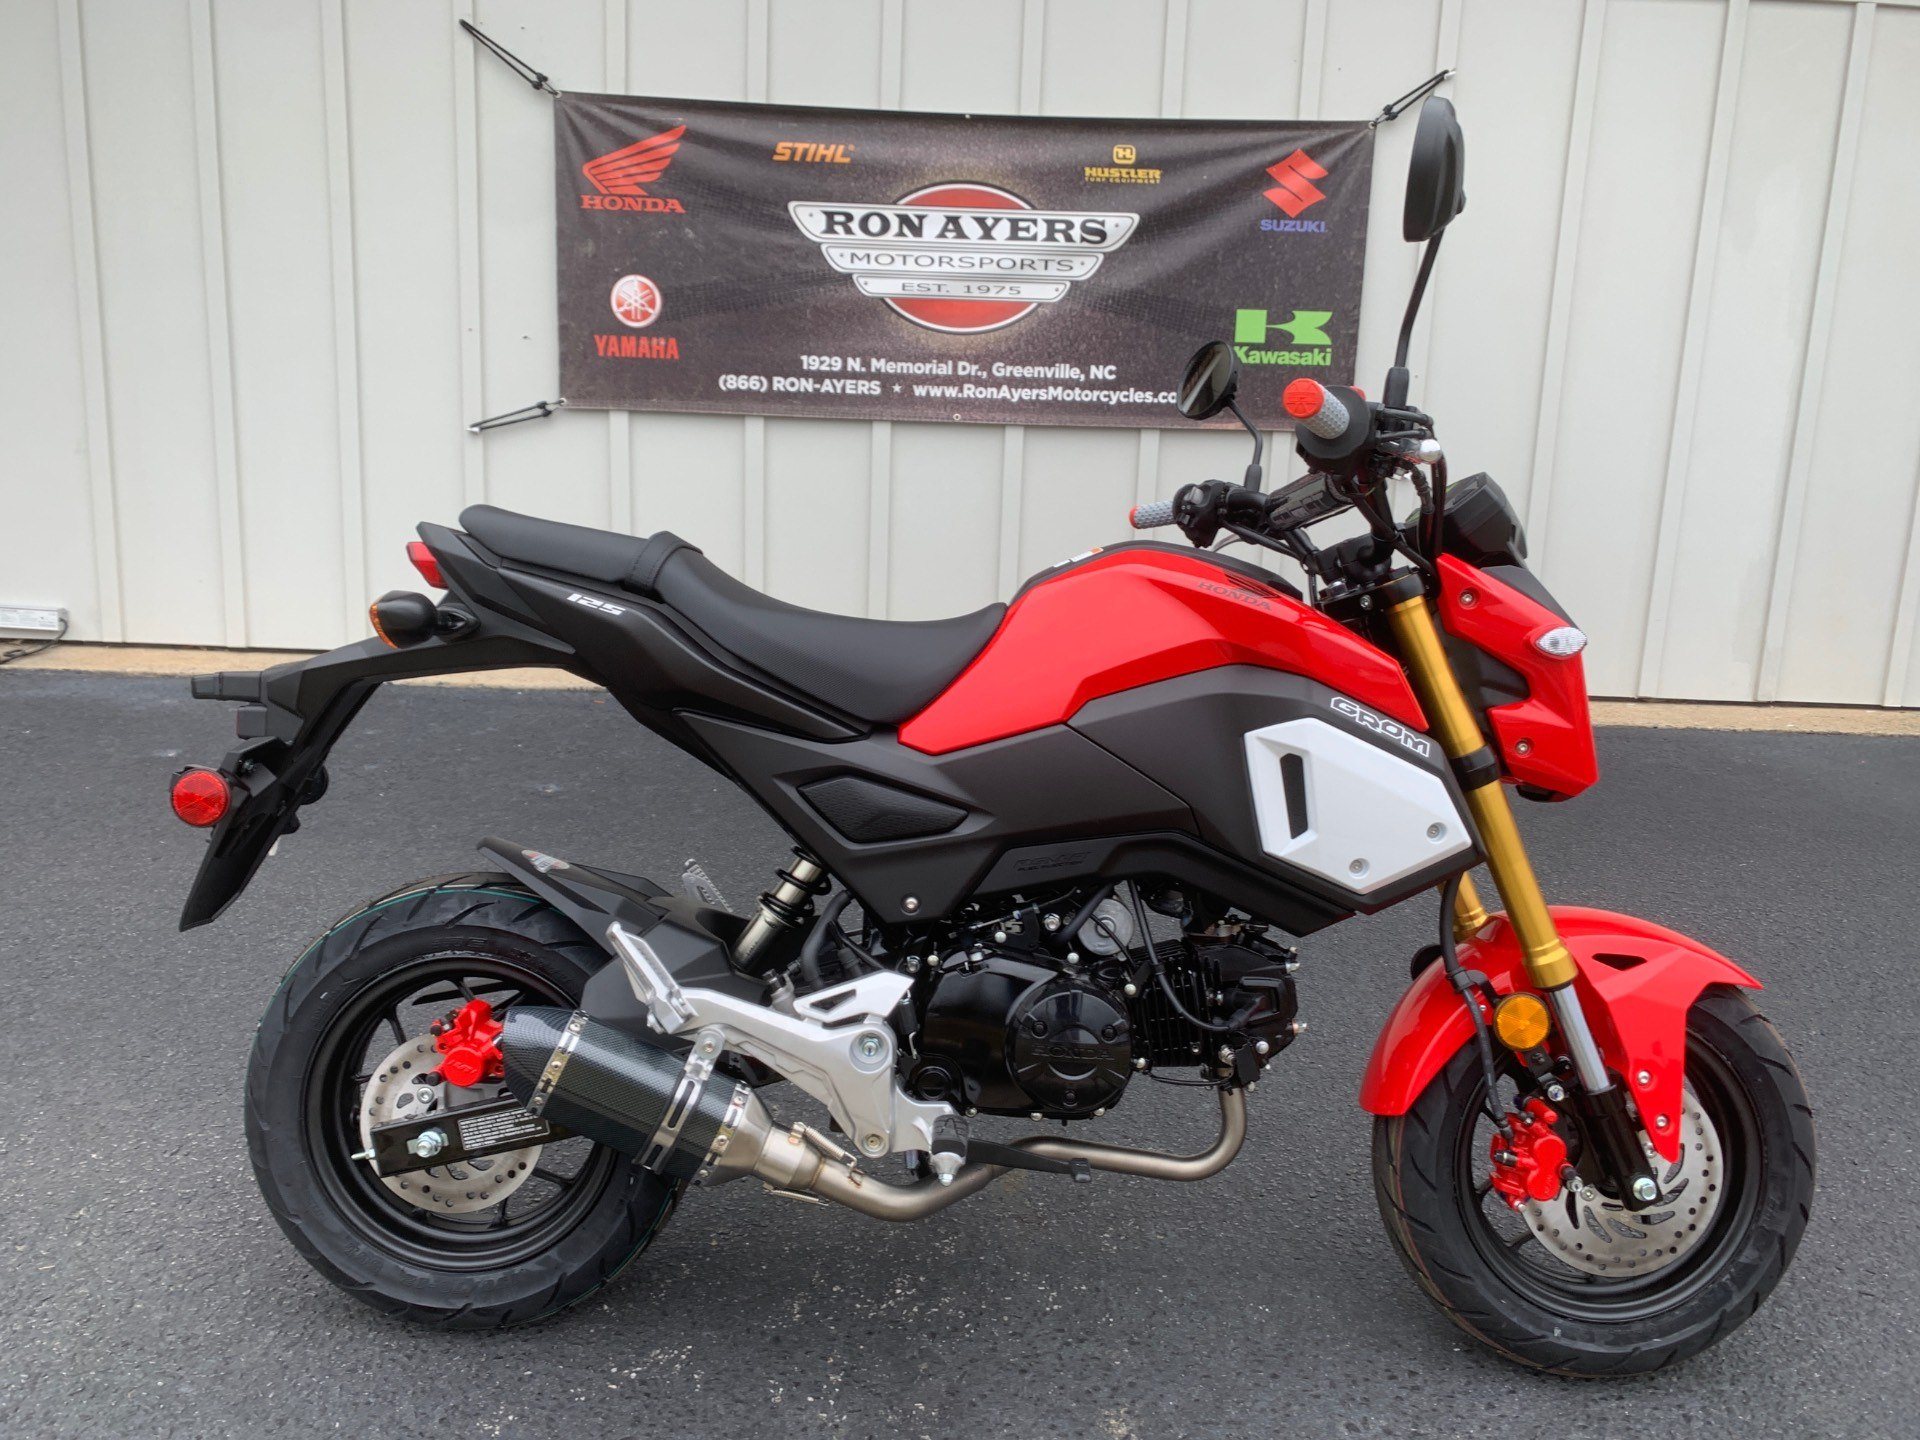 New 2020 Honda Grom Motorcycles In Greenville Nc Stock Number N A